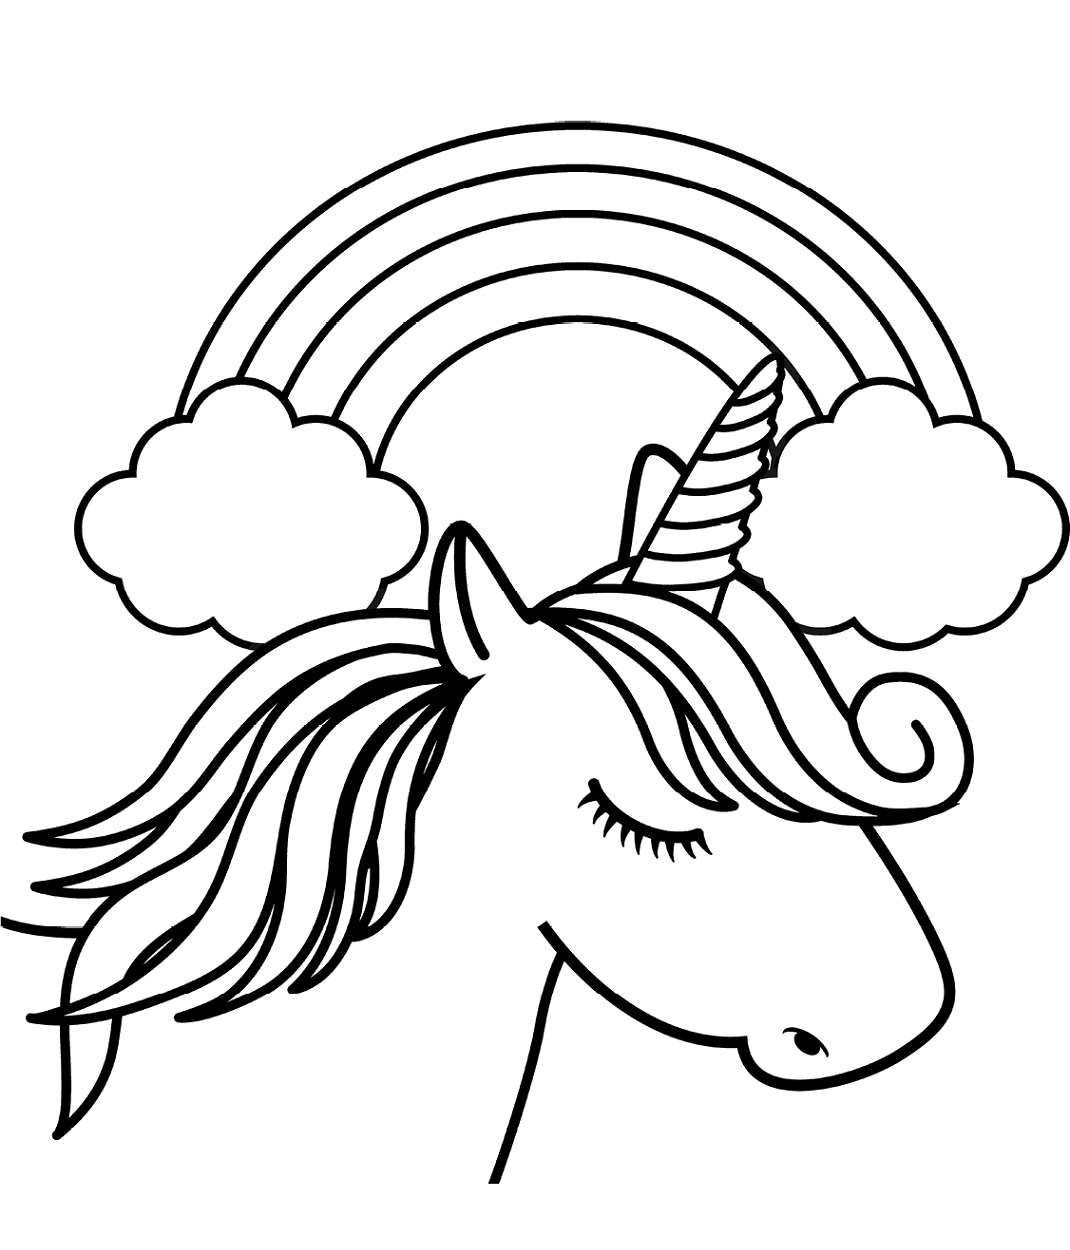 unicorn head in front of rainbow coloring page free printable coloring pages for kids